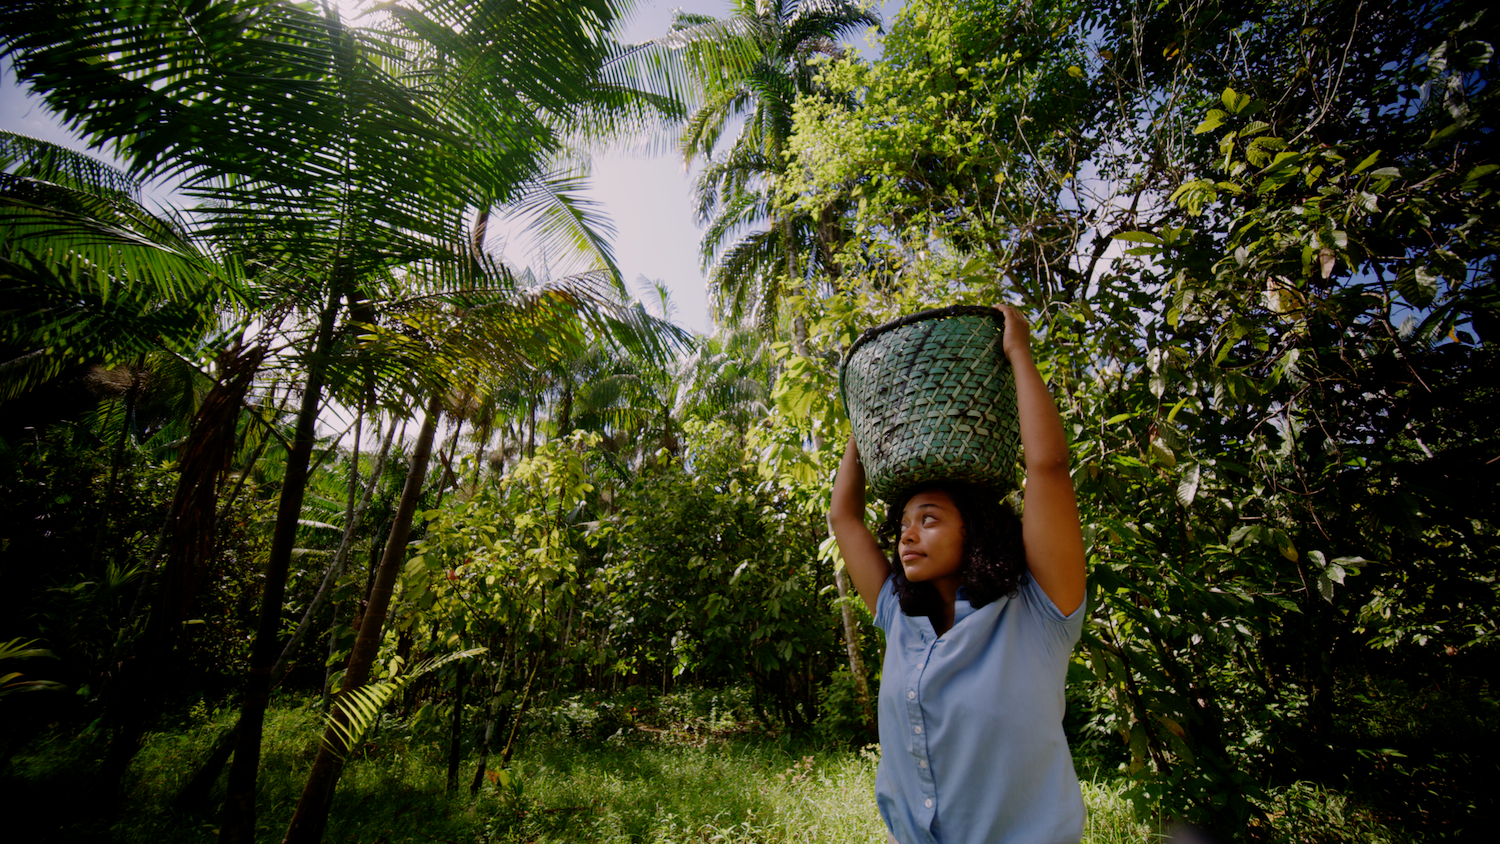 A woman carries a basket on her head through a forest